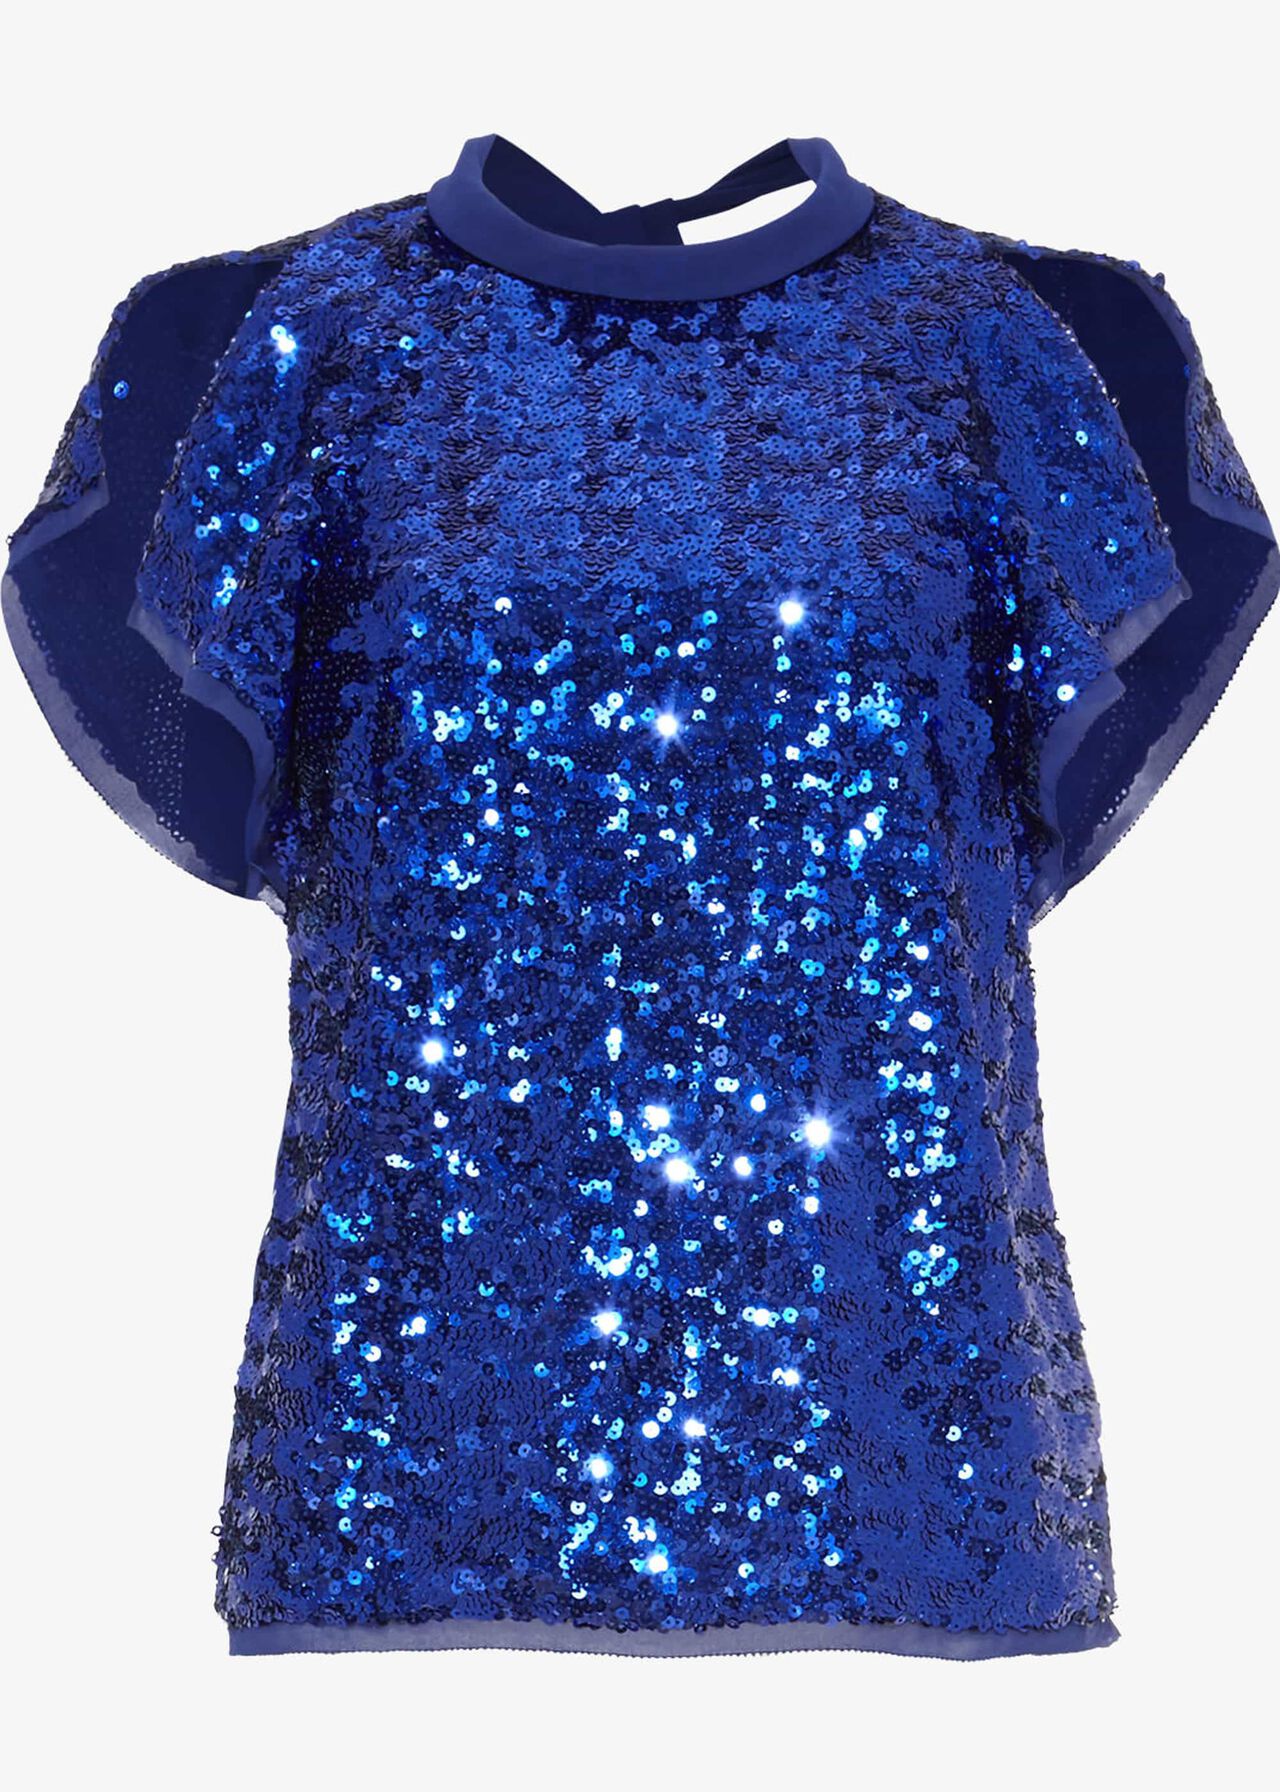 Tally Sequin Blouse